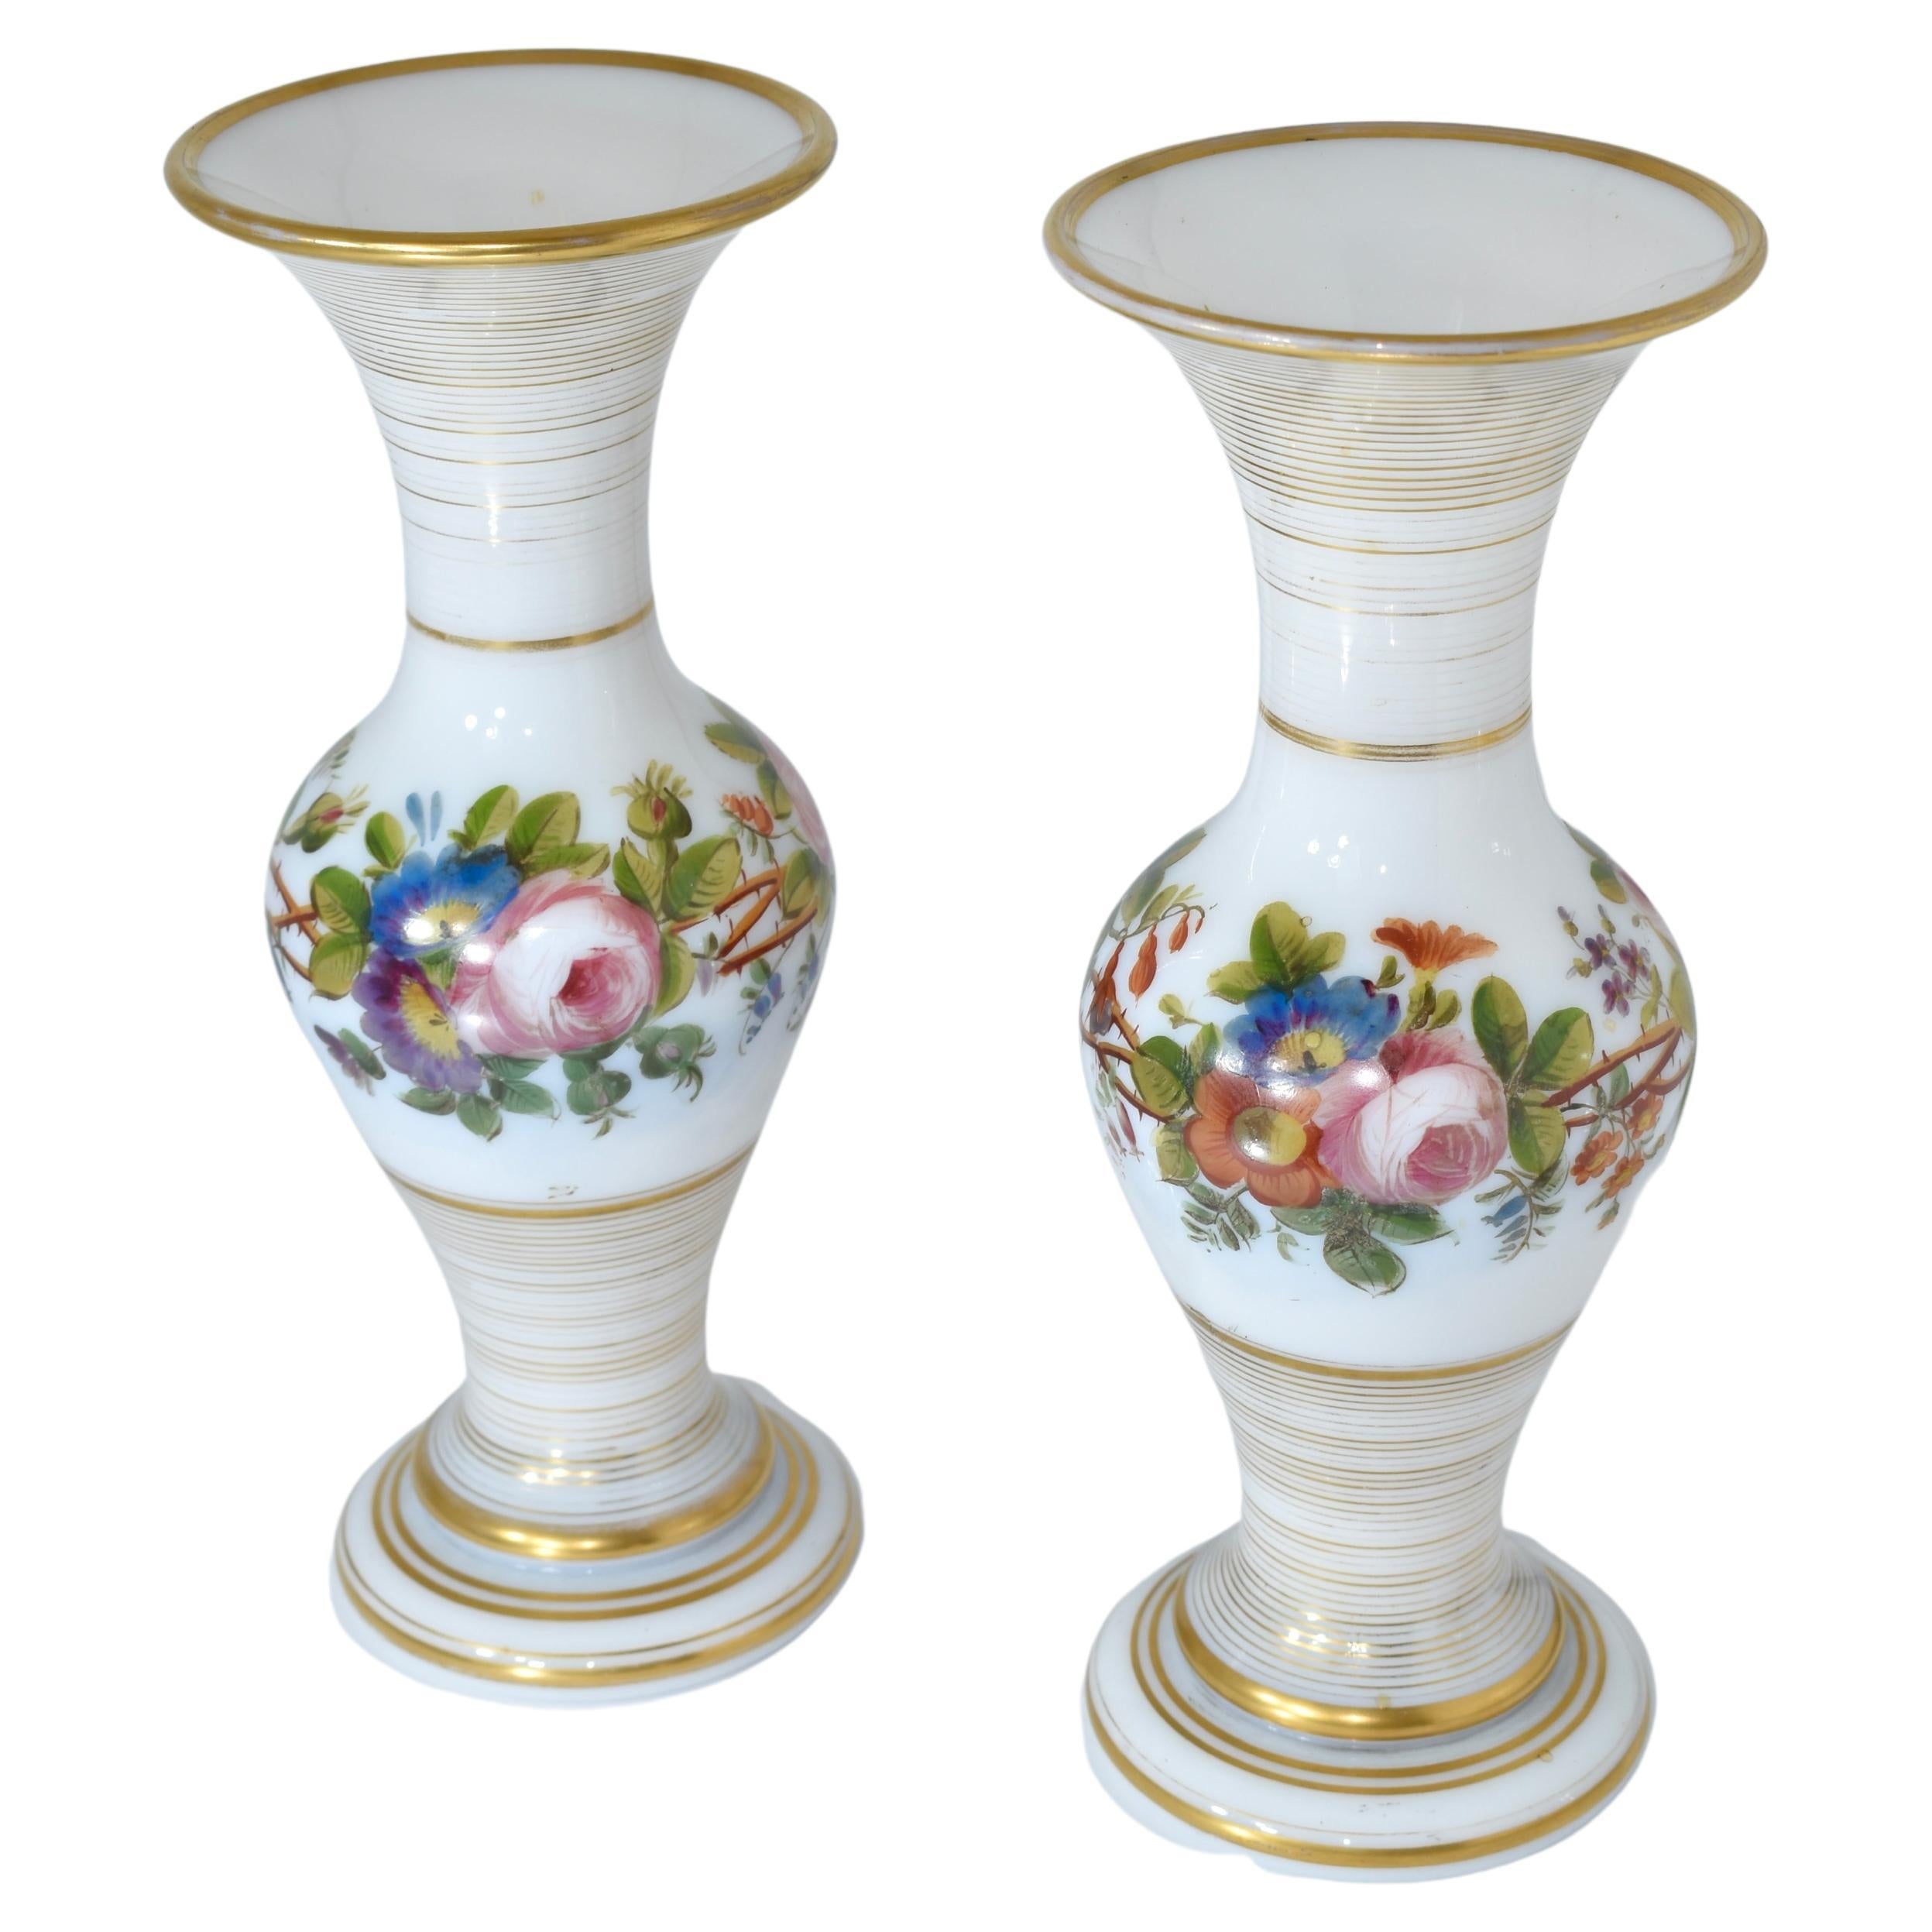 Opaline Glass Antique Pair of Vases, French Opaline by Baccarat, 19th Century For Sale